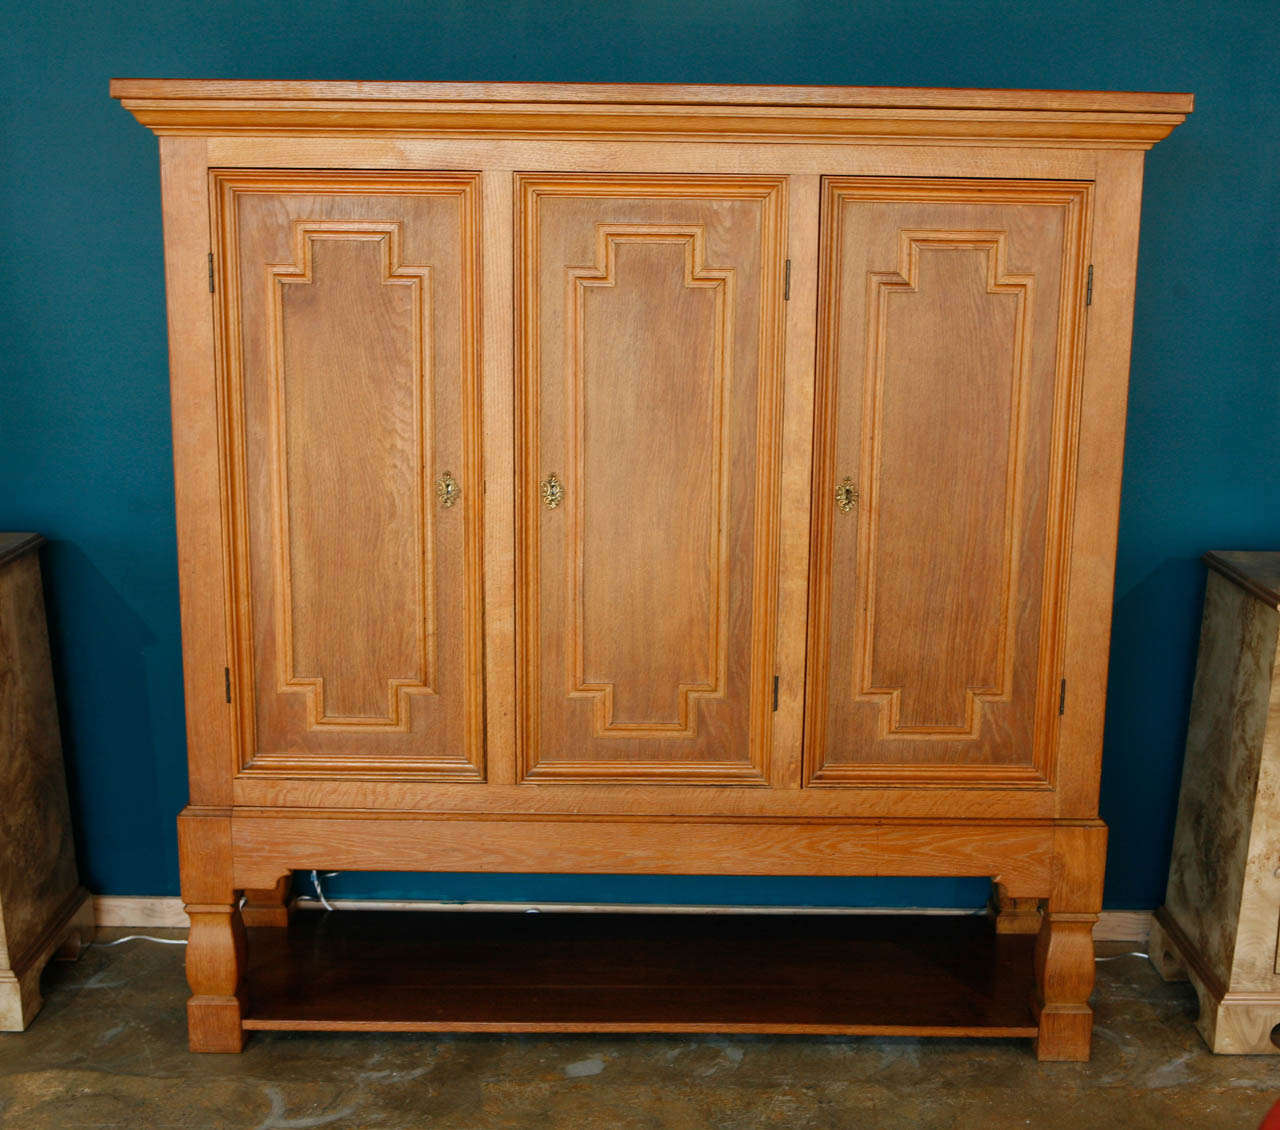 Three-door French oak cabinet.
Visit the Paul Marra storefront to see more furnishings and lighting including 21st Century.